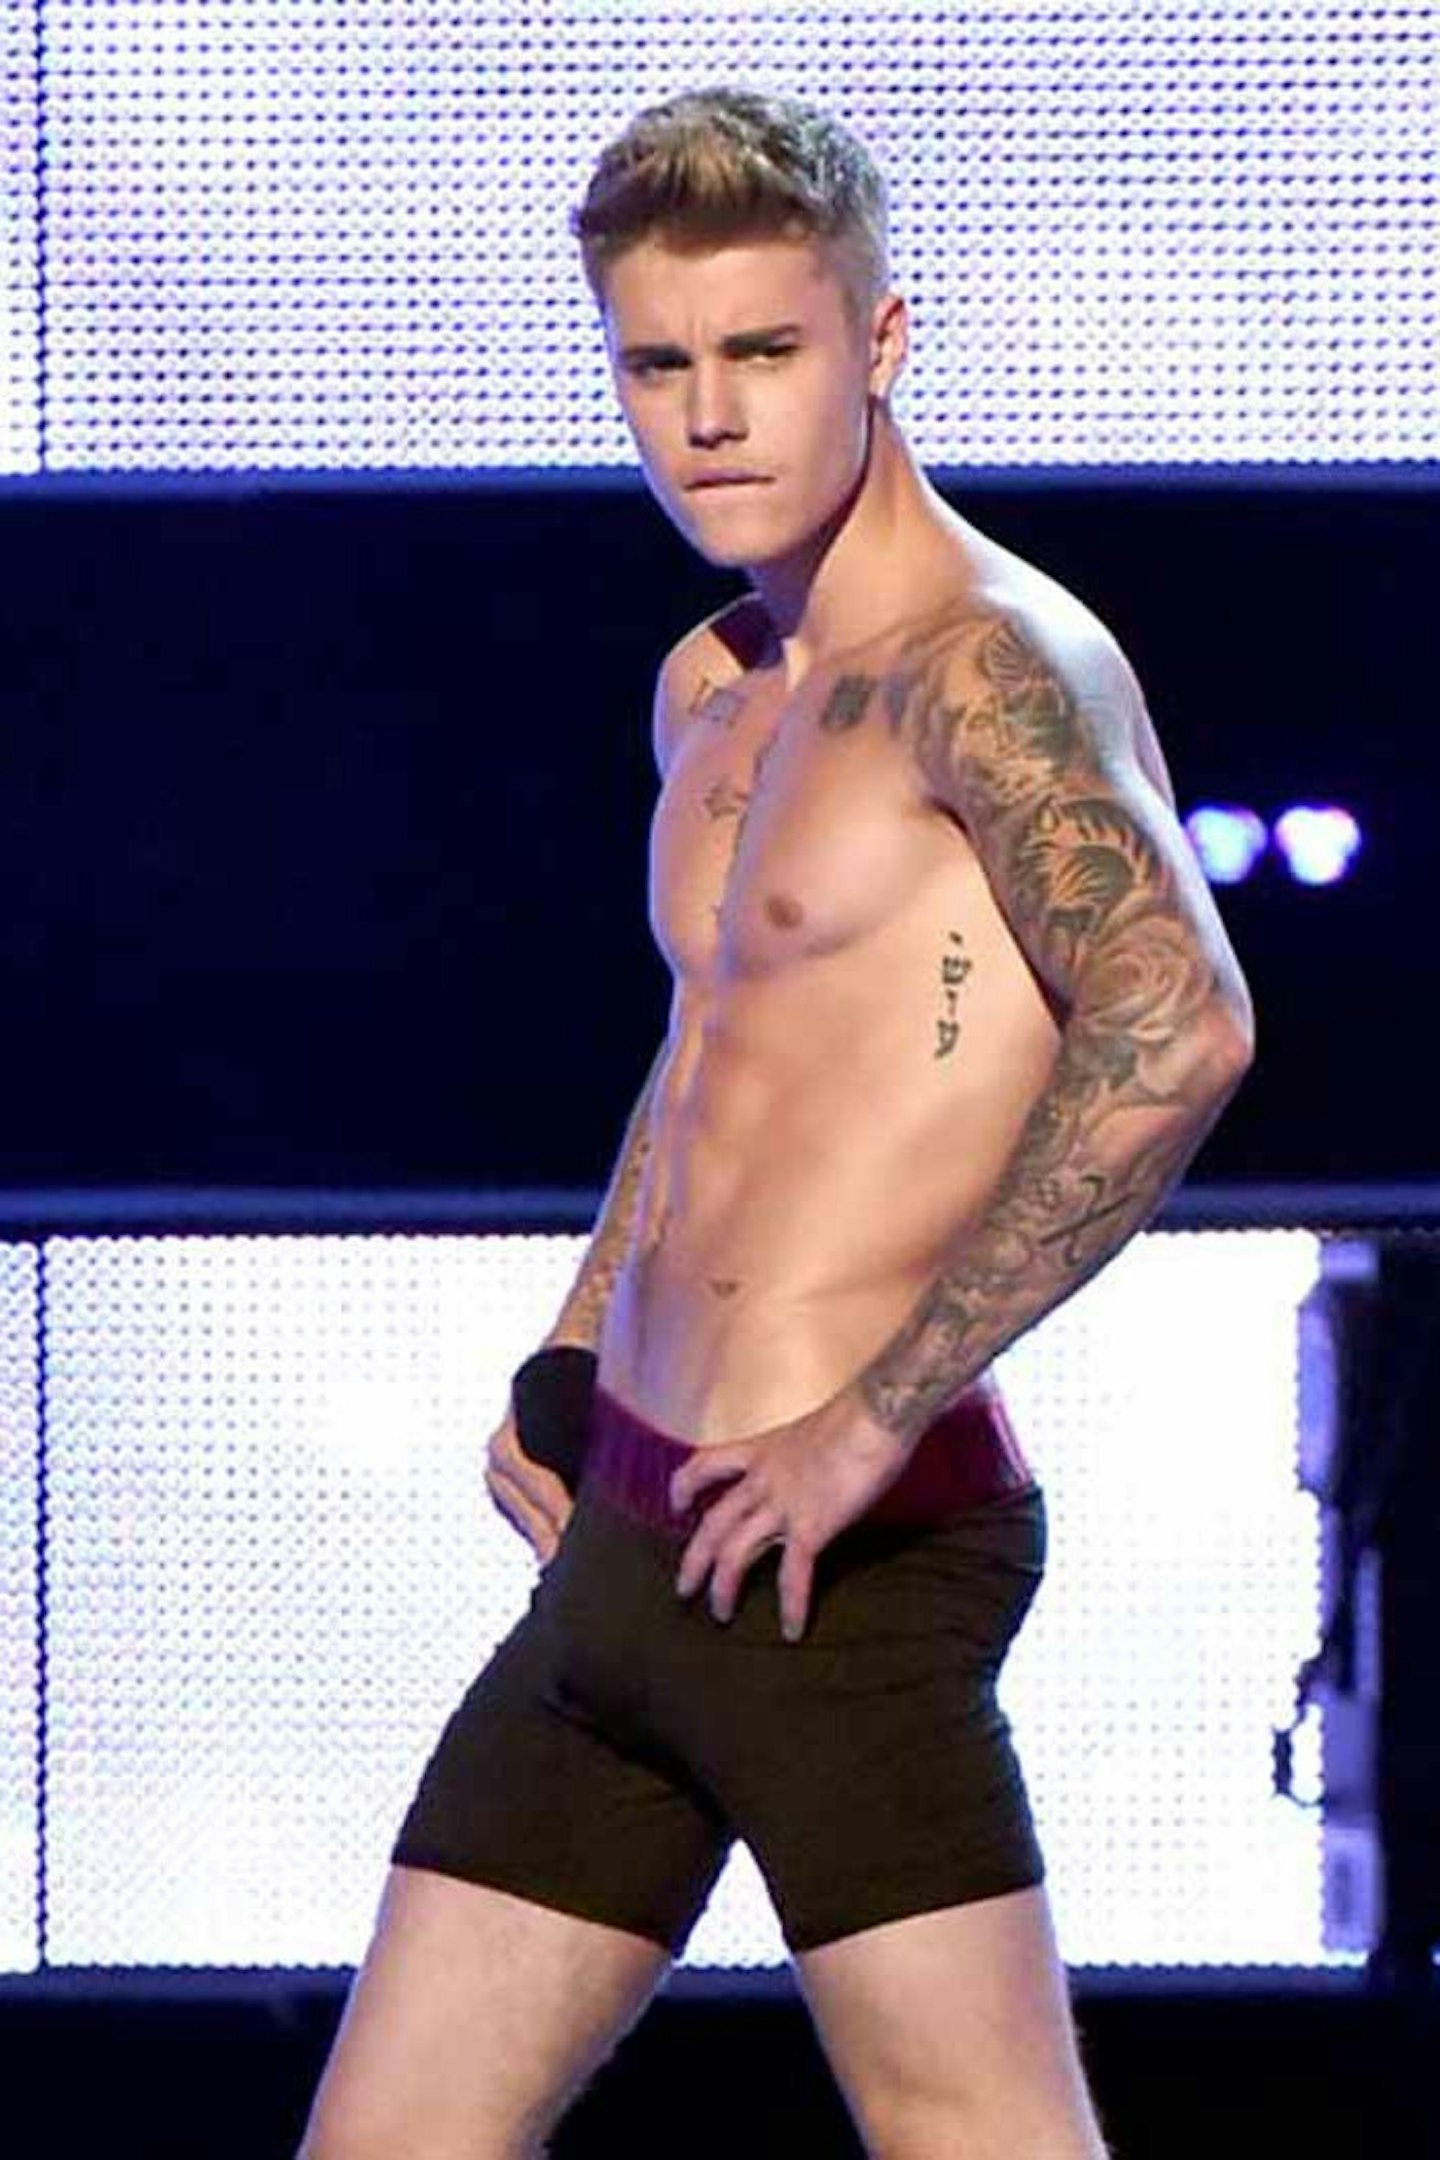 Justin Bieber strips off on stage at Fashion Rocks